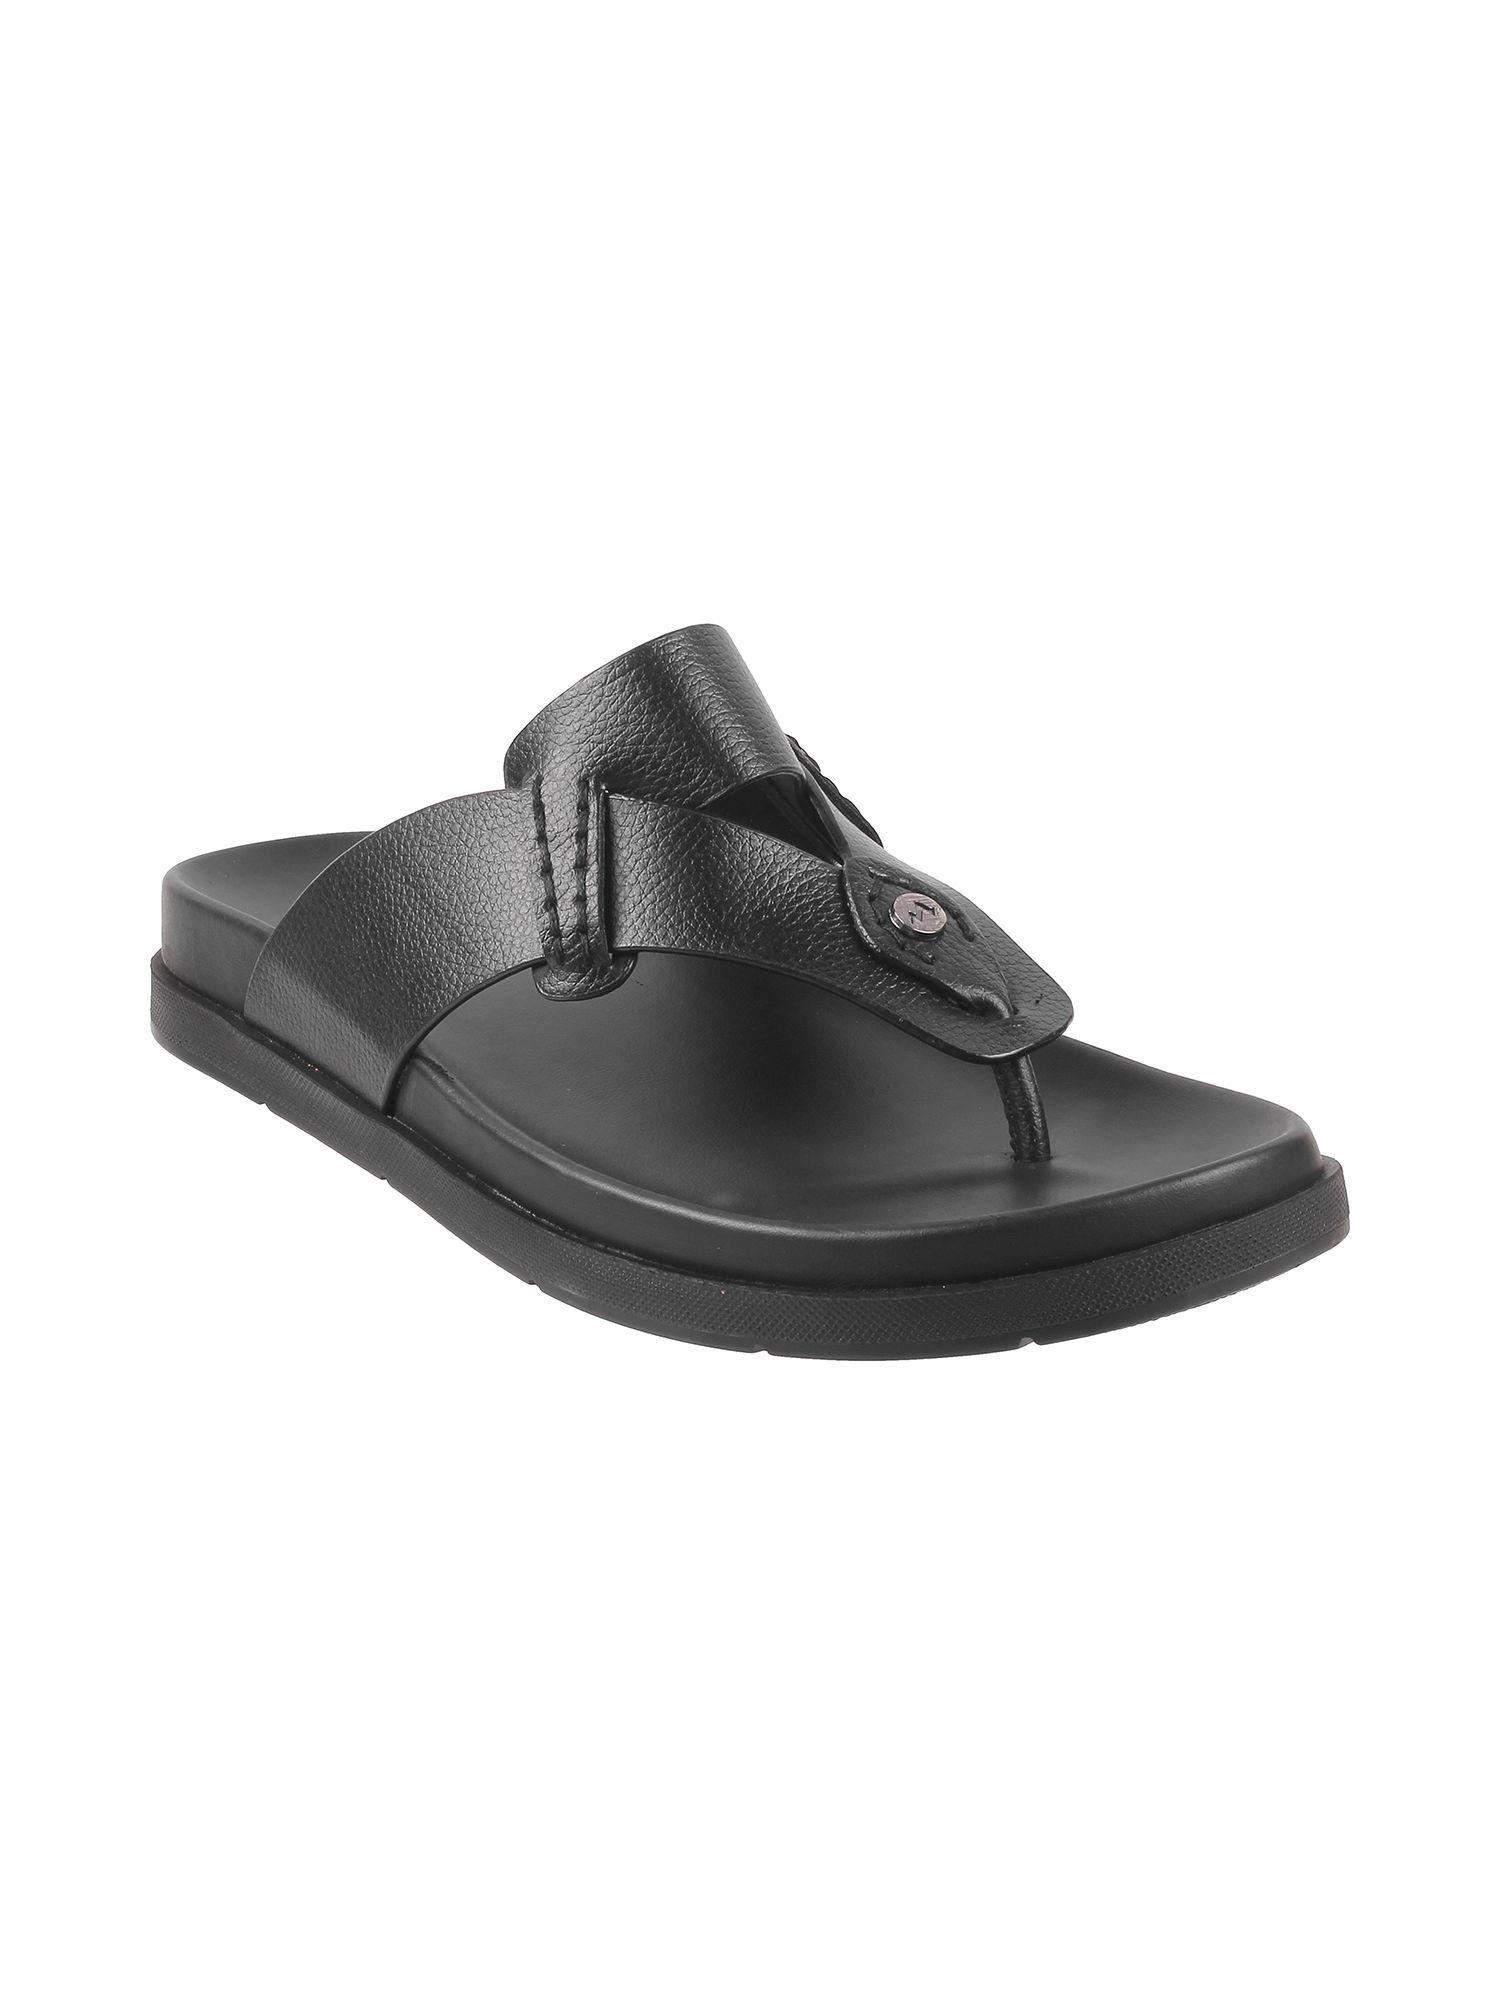 Men Casual Synthetic Black Sandals